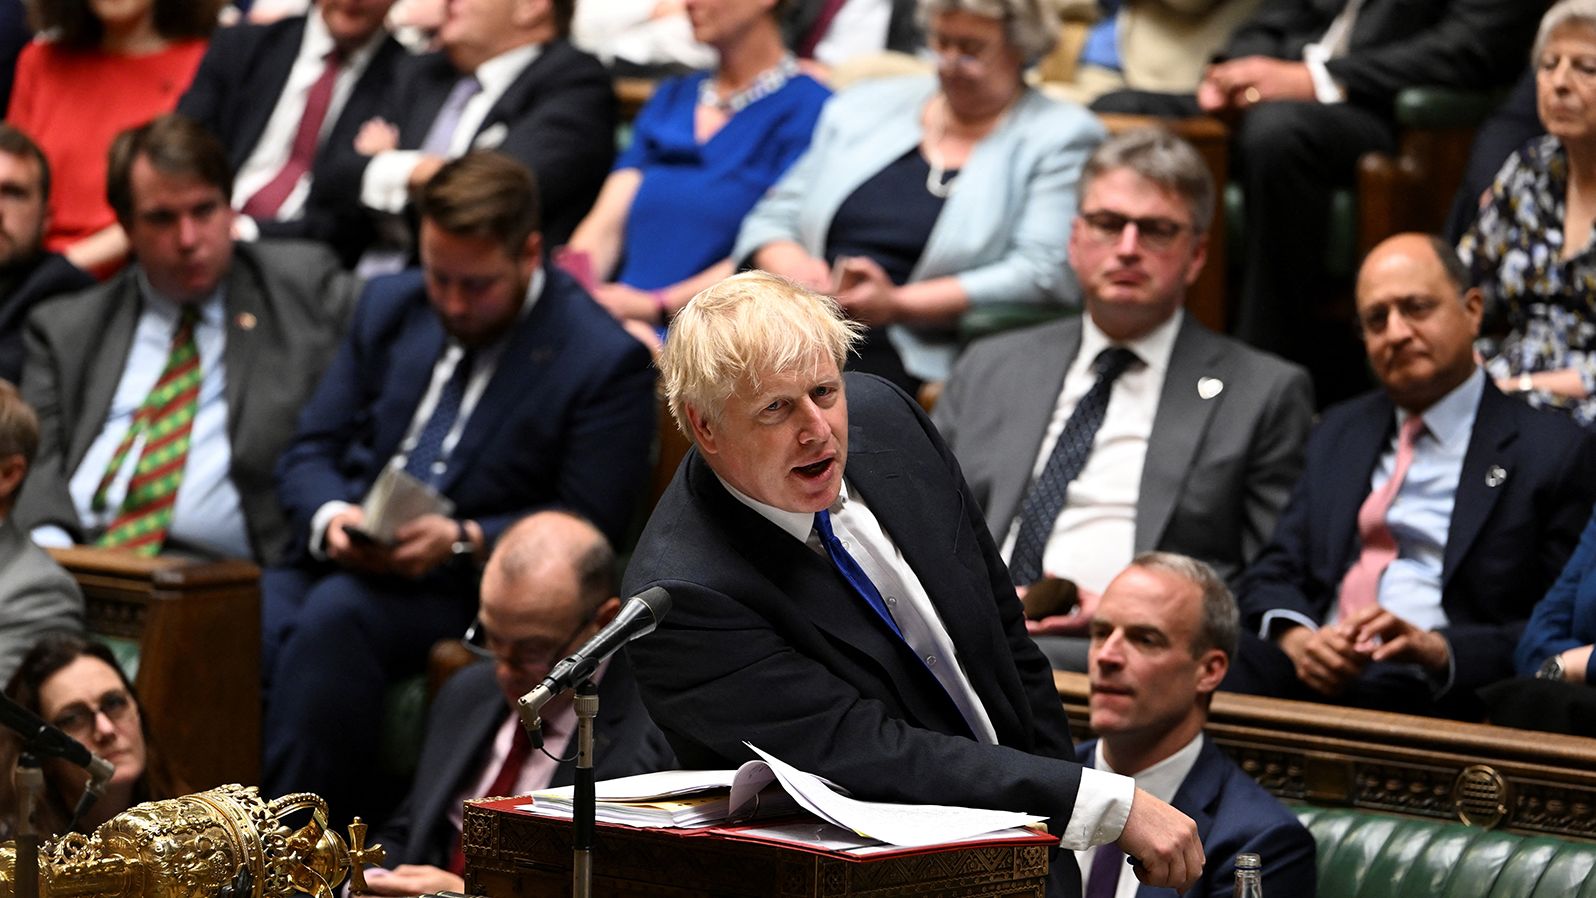 At Prime Minister's Questions on July 6, Johnson sa